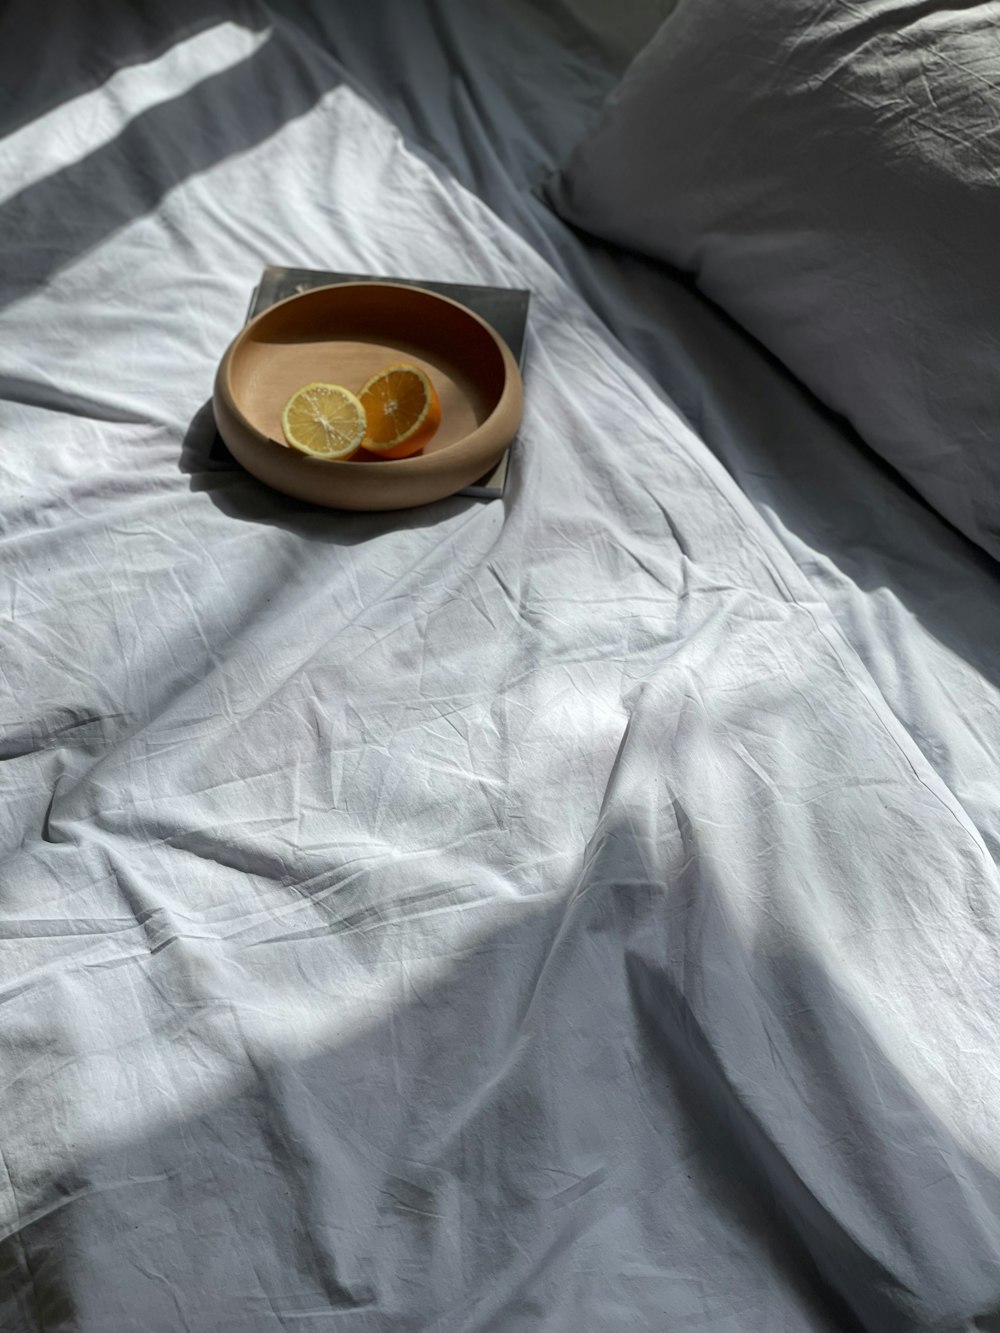 a bowl of lemons on a bed with white sheets